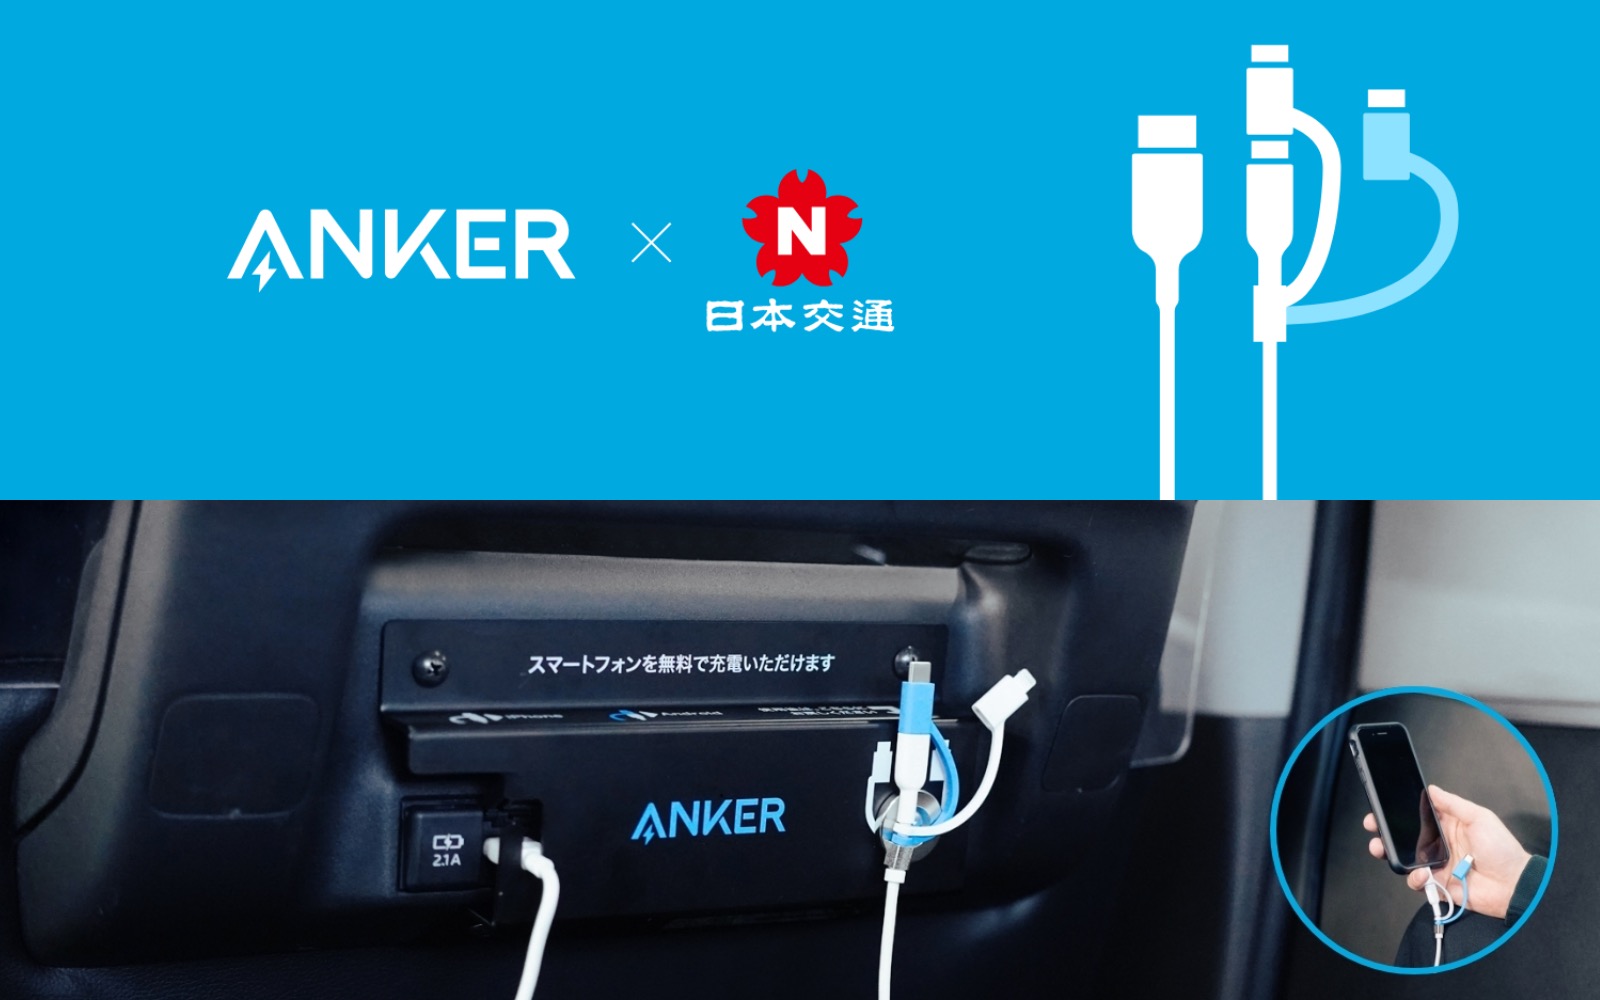 Anker and Japan Taxi